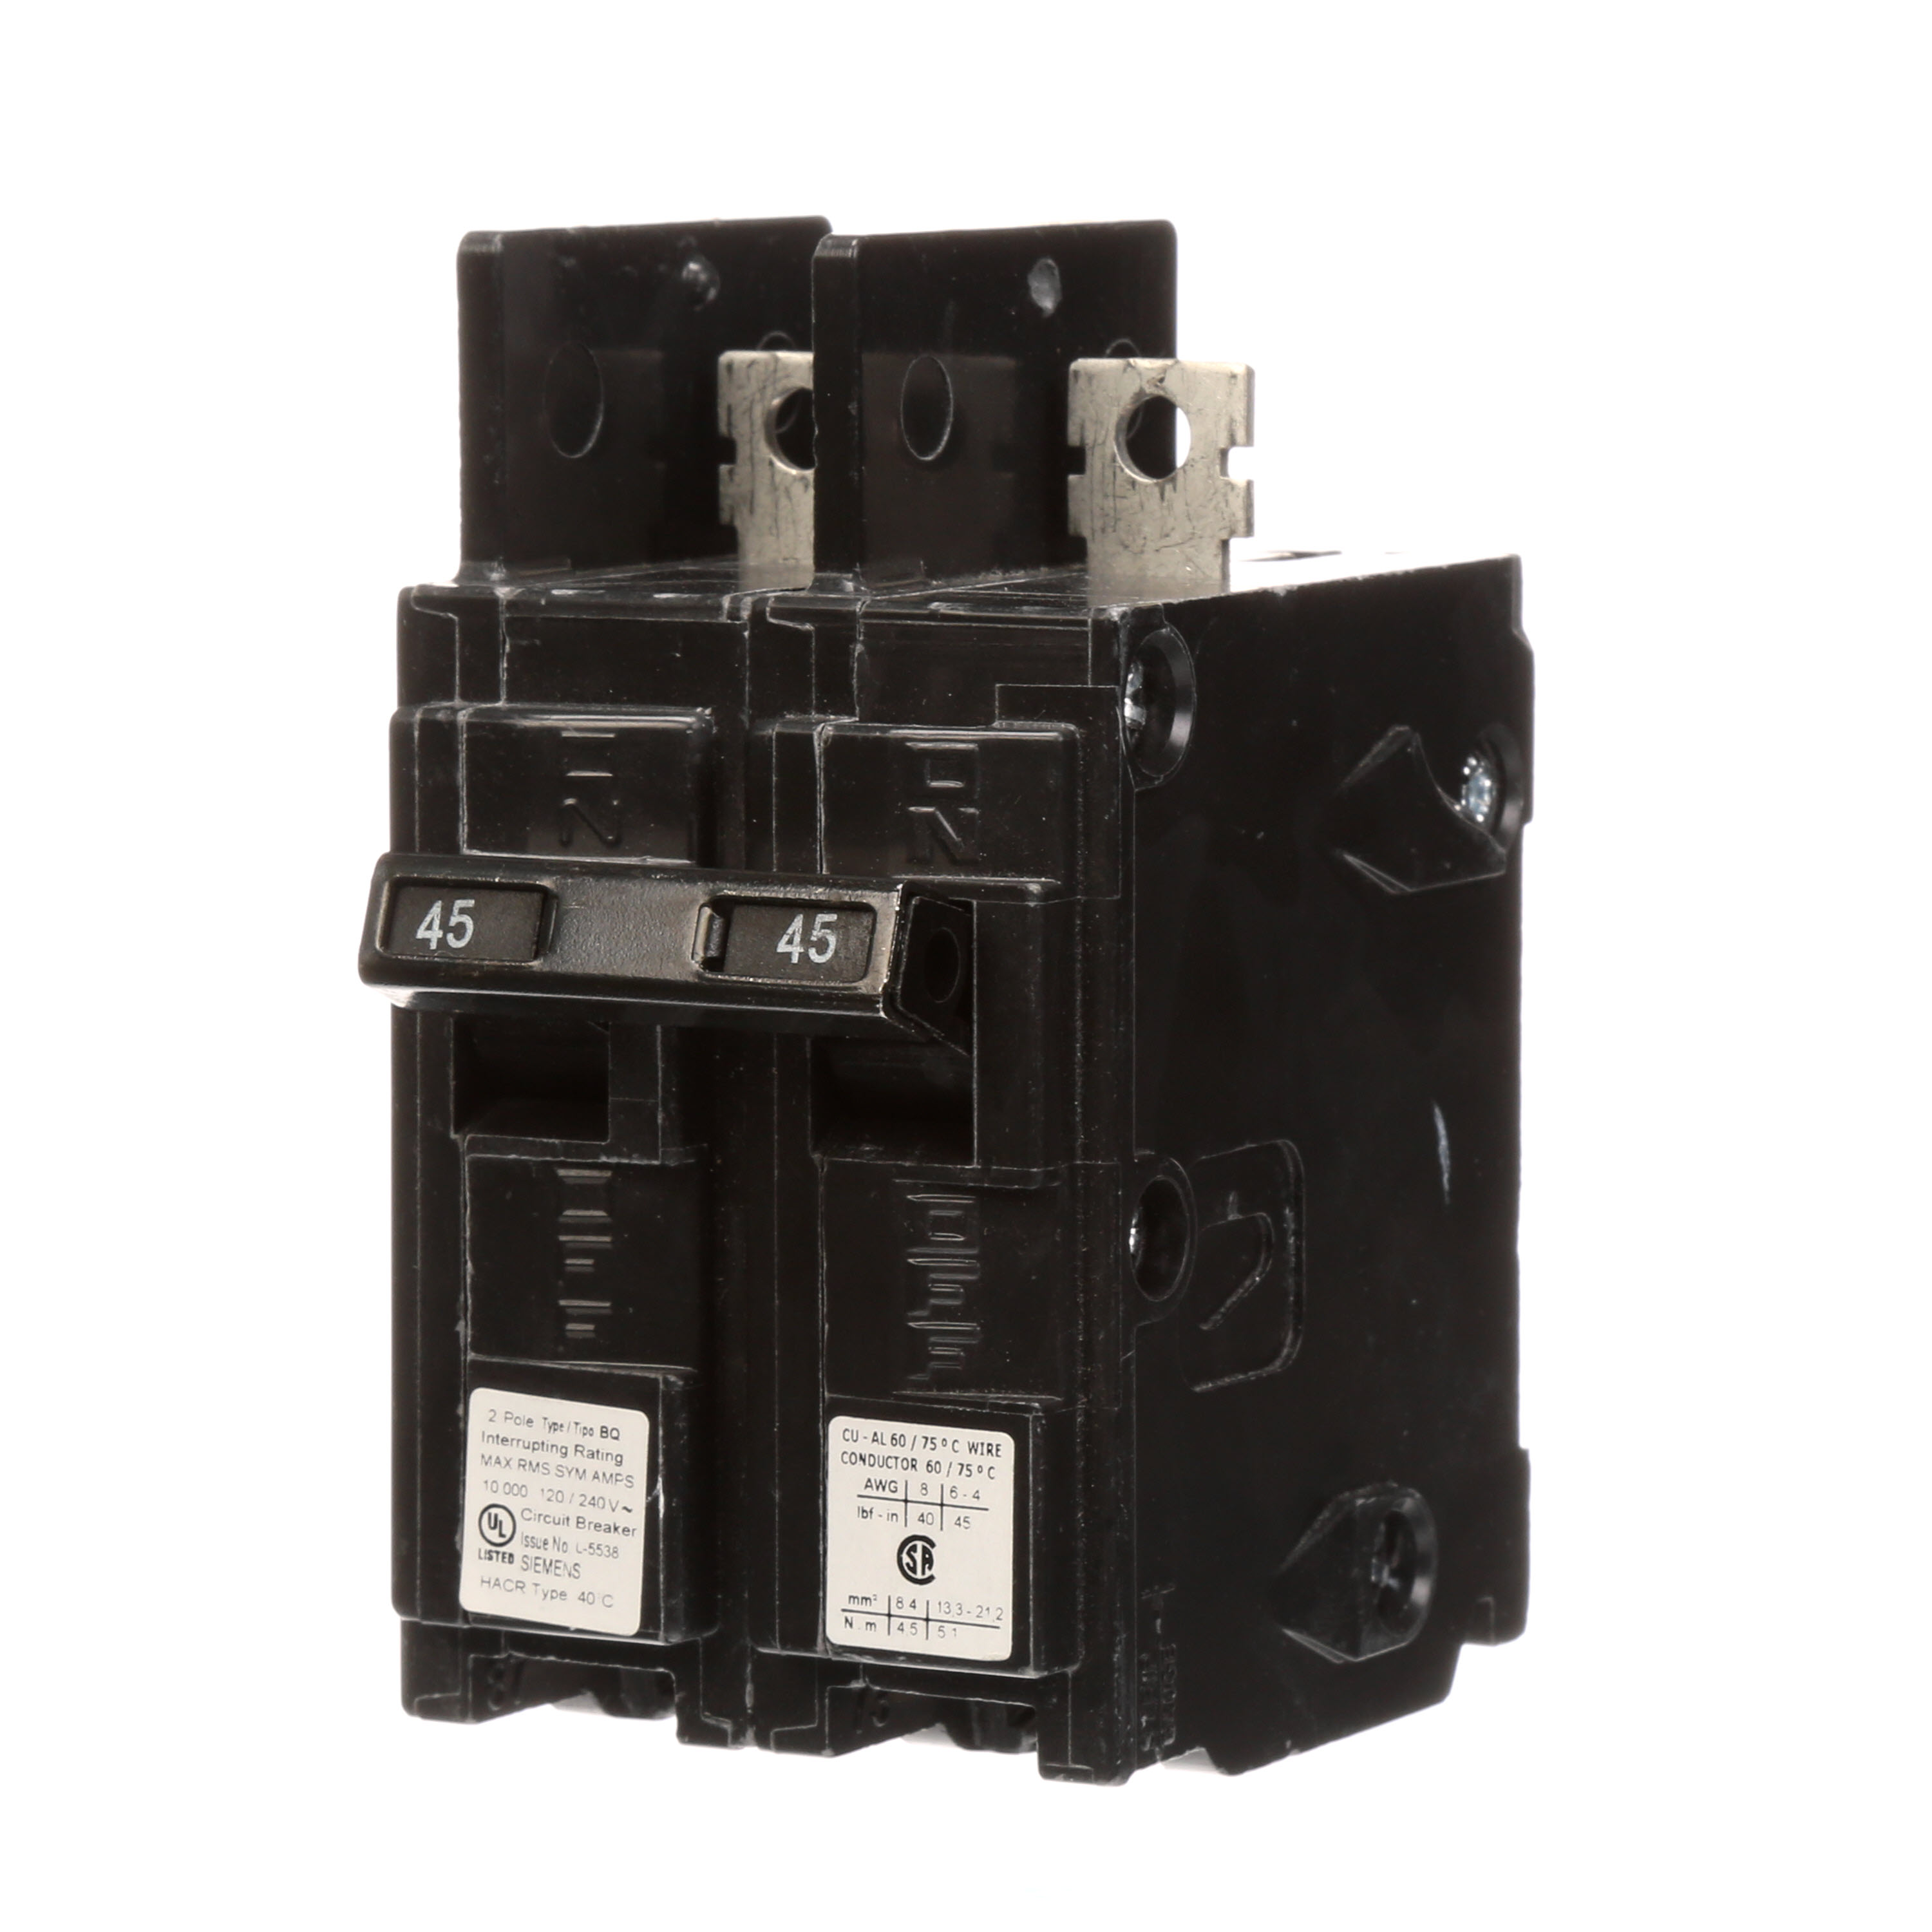 Siemens Low Voltage Molded Case Circuit Breakers General Purpose MCCBs - Type BQ, 2-Pole, 120/240VAC are Circuit Protection Molded Case Circuit Breakers. 2-Pole Common-Trip circuit breaker type BQ. Rated 120/240V (045A) (AIR 10 kA). Special features Load side lugs are included.